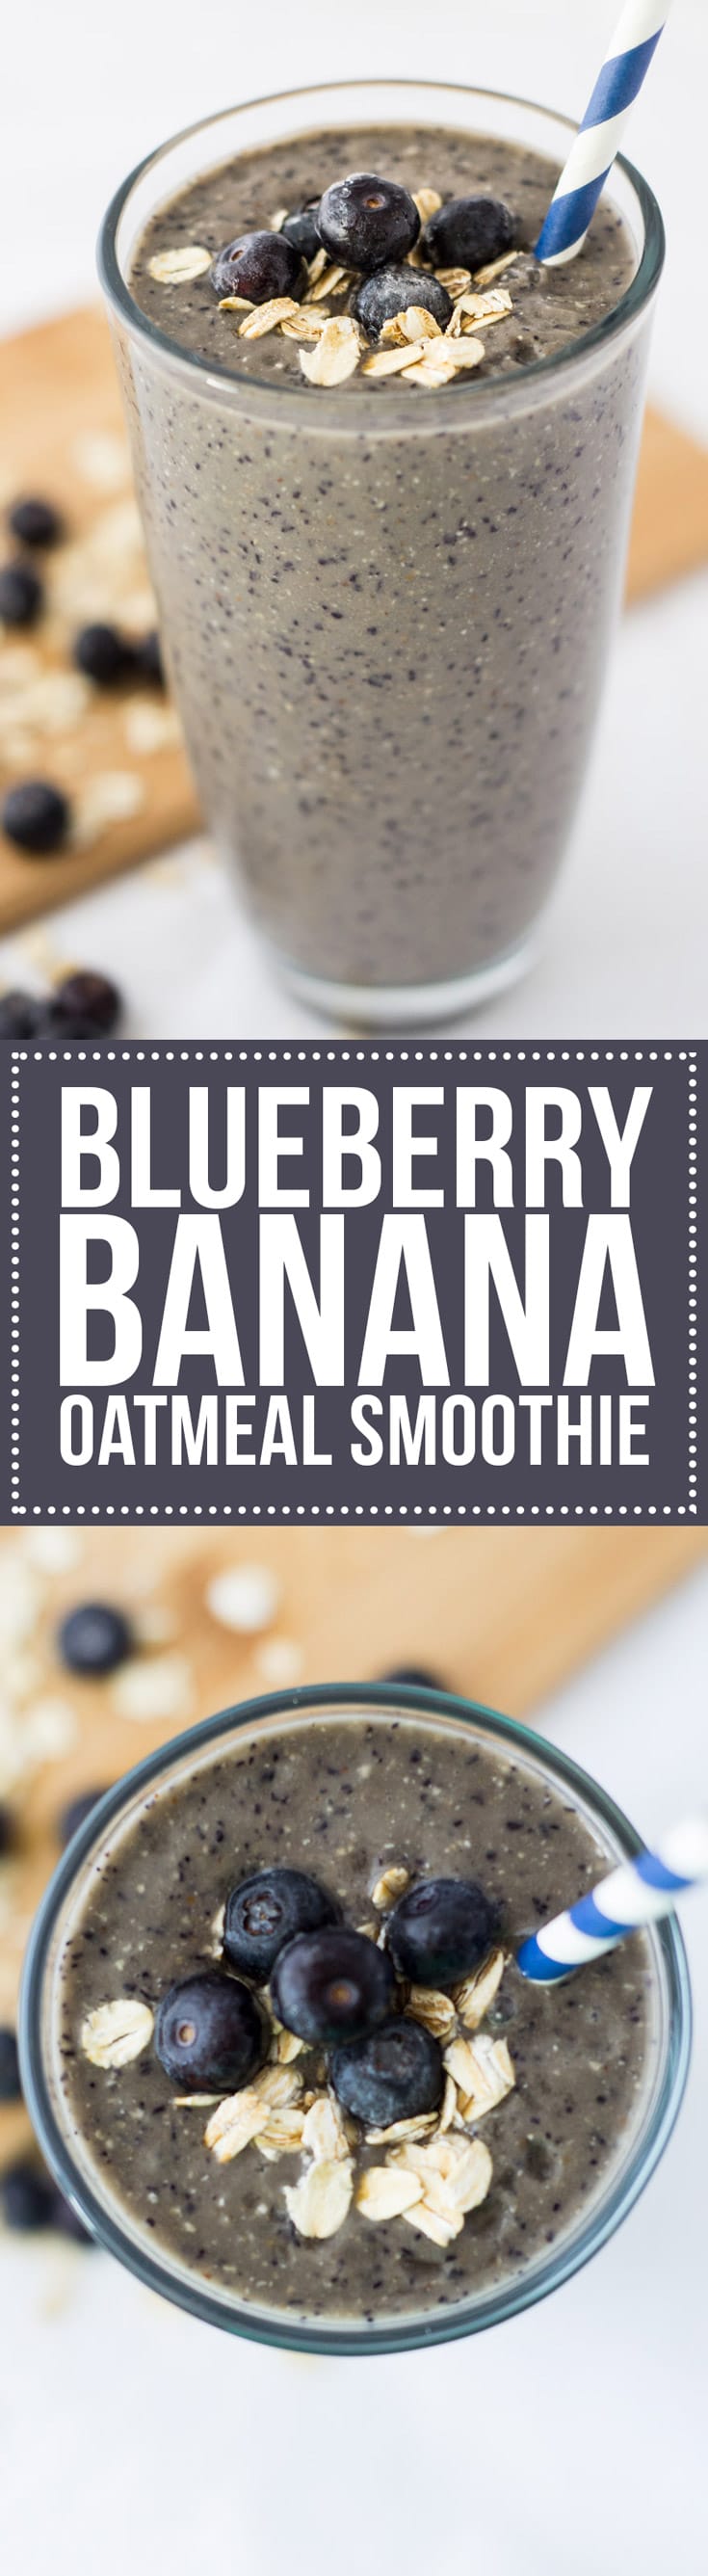 This Blueberry Banana Oatmeal Smoothie is the perfect breakfast smoothie recipe to start the day! With fresh fruit, whole grains and yogurt, it's so good for you!